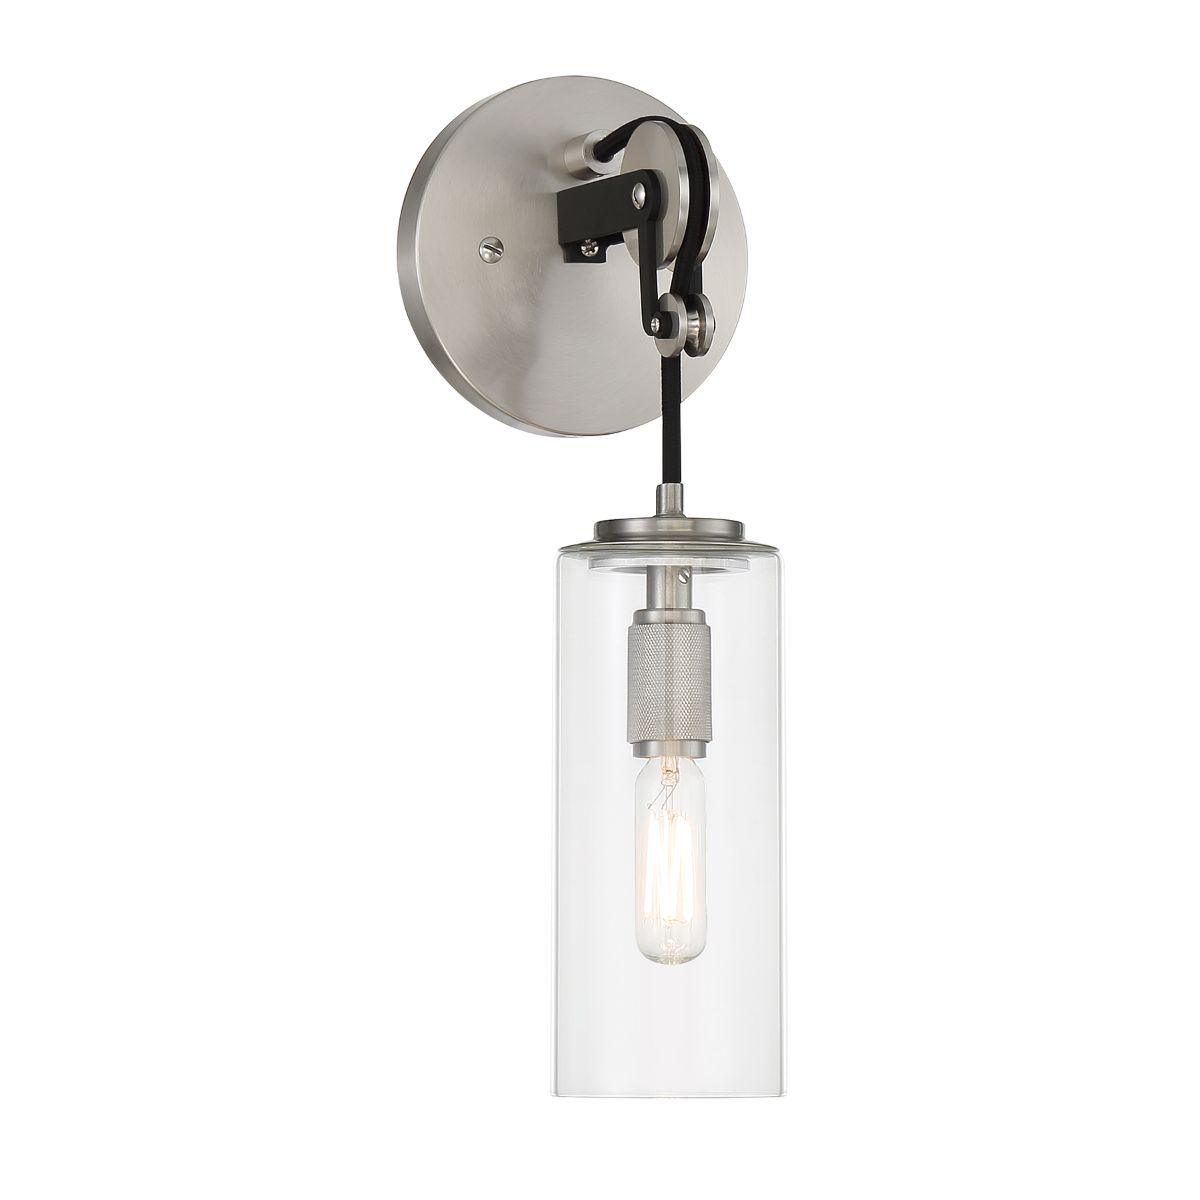 Pullman Junction 13 in. Wall Sconce Brushed Nickel & Black finish